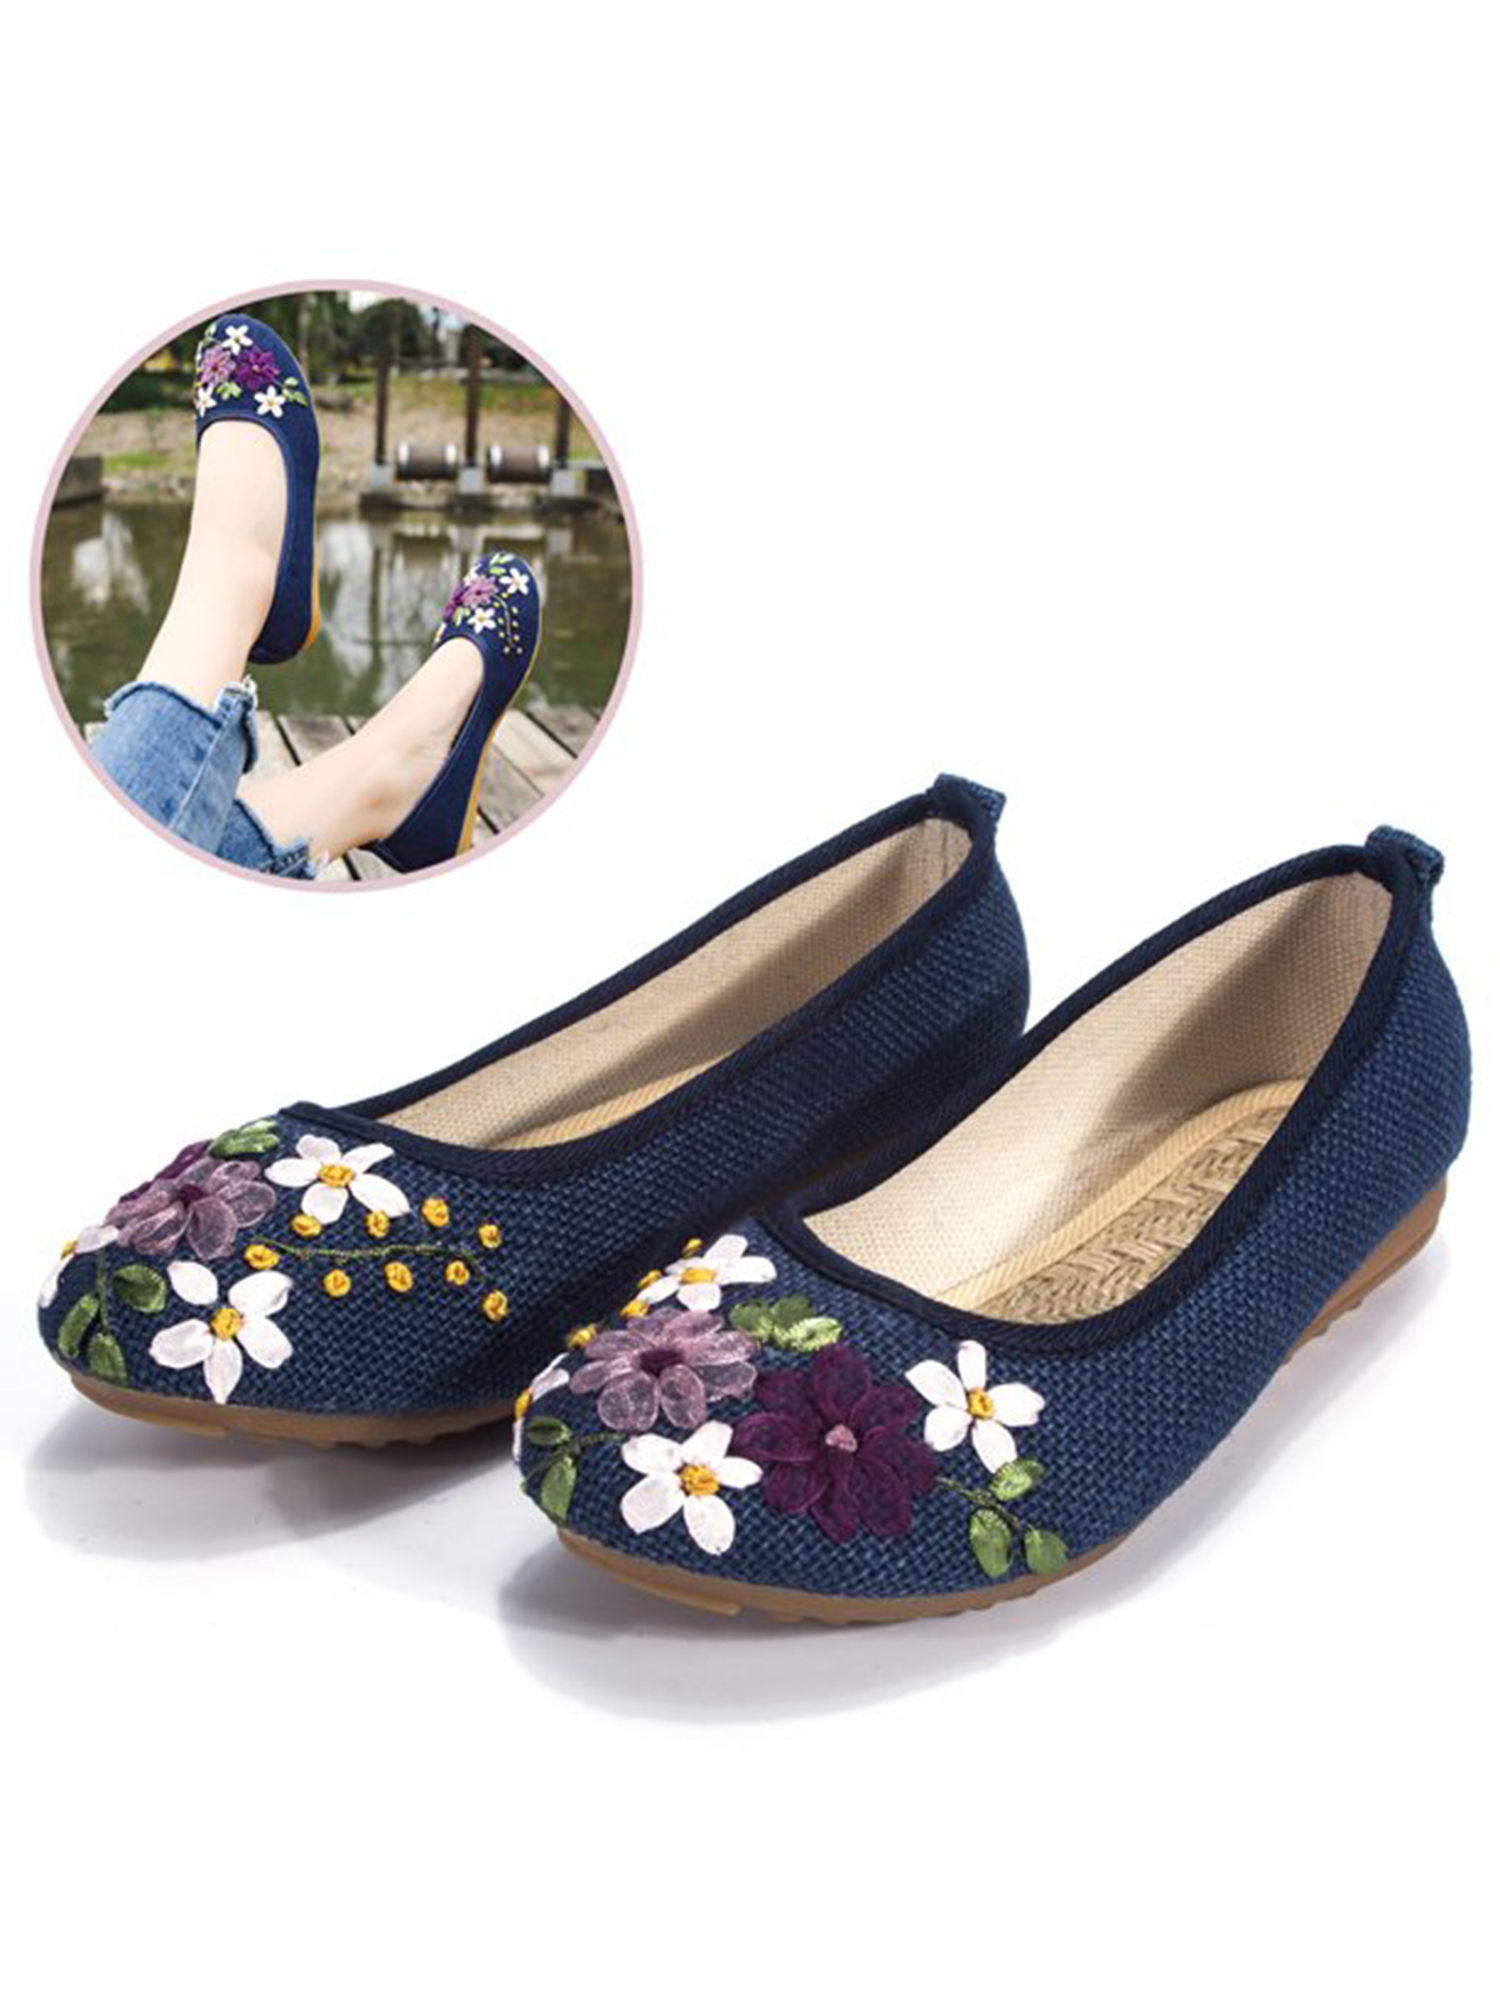 FANNYC Women's Ballet Flats Shoe Slip On Casual Driving Loafers Hemp soled shoes Non-Slip Flat Walking Shoes Slip On Flats Shoes Round Toe Ballet Flats with Delicate Embroidery Flower - image 4 of 7